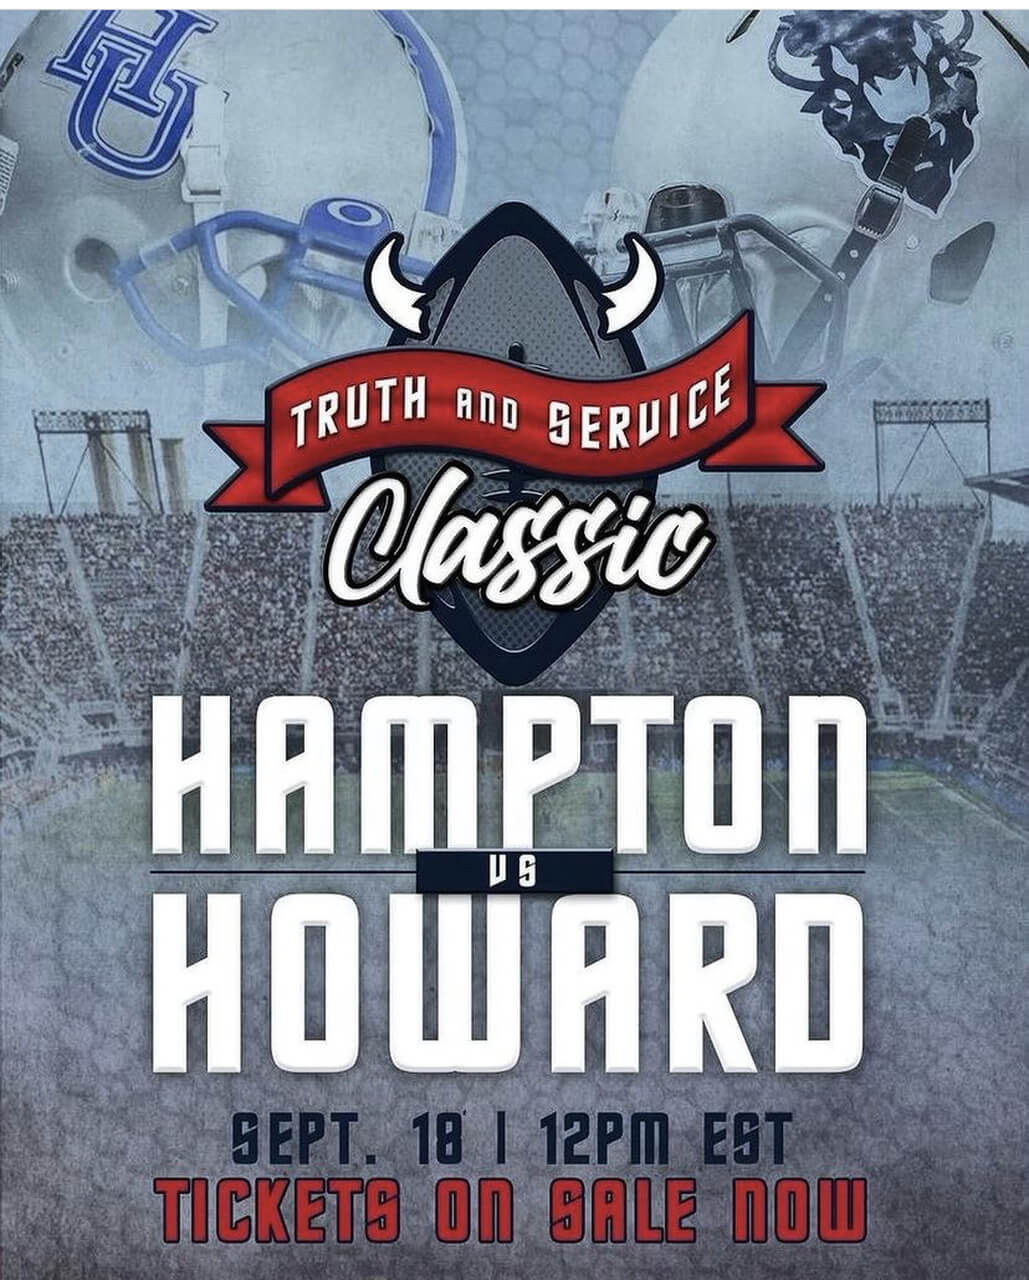 Truth and Service Classic Hampton vs Howard Sept. 18 12PM EST Tickets on Sale Now